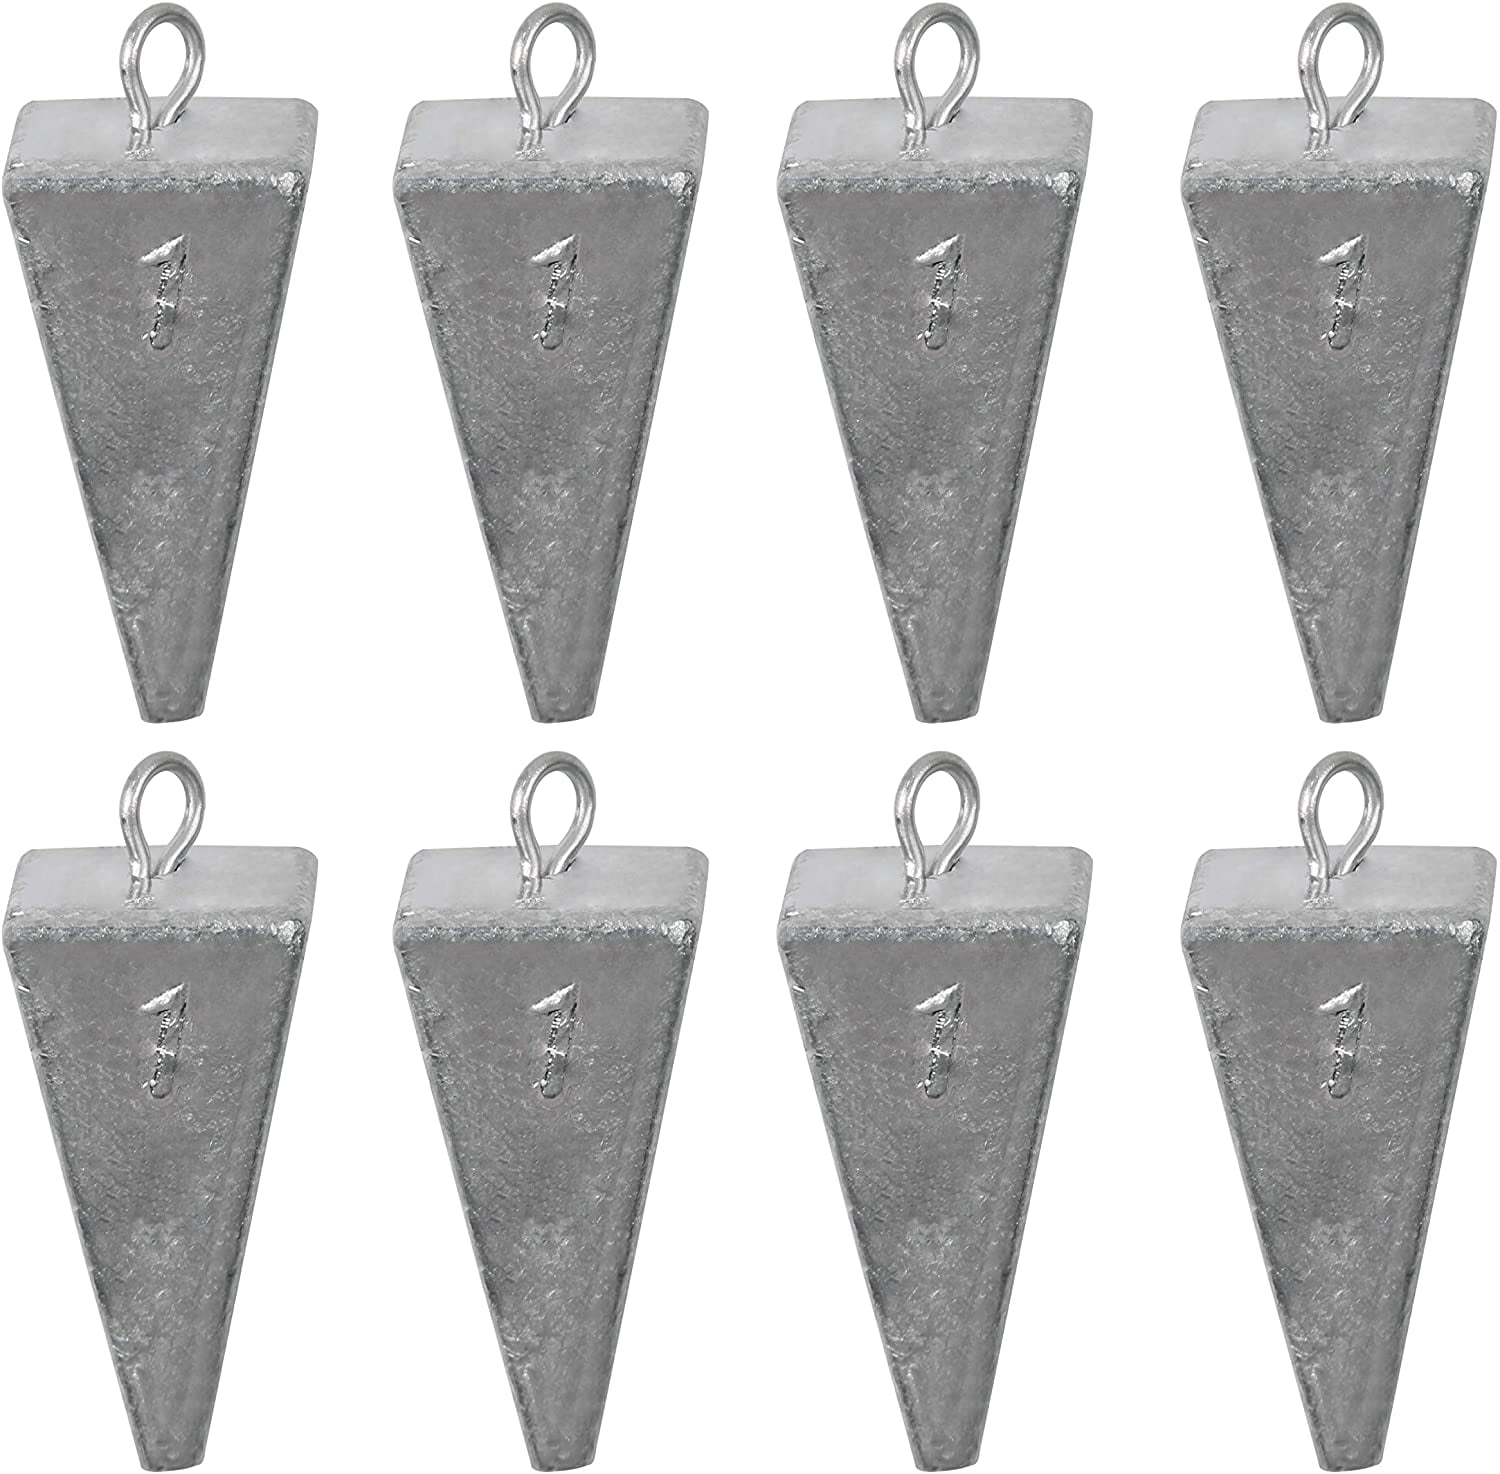 lead weights 8pcs.8oz cannon ball sinkers fishing 